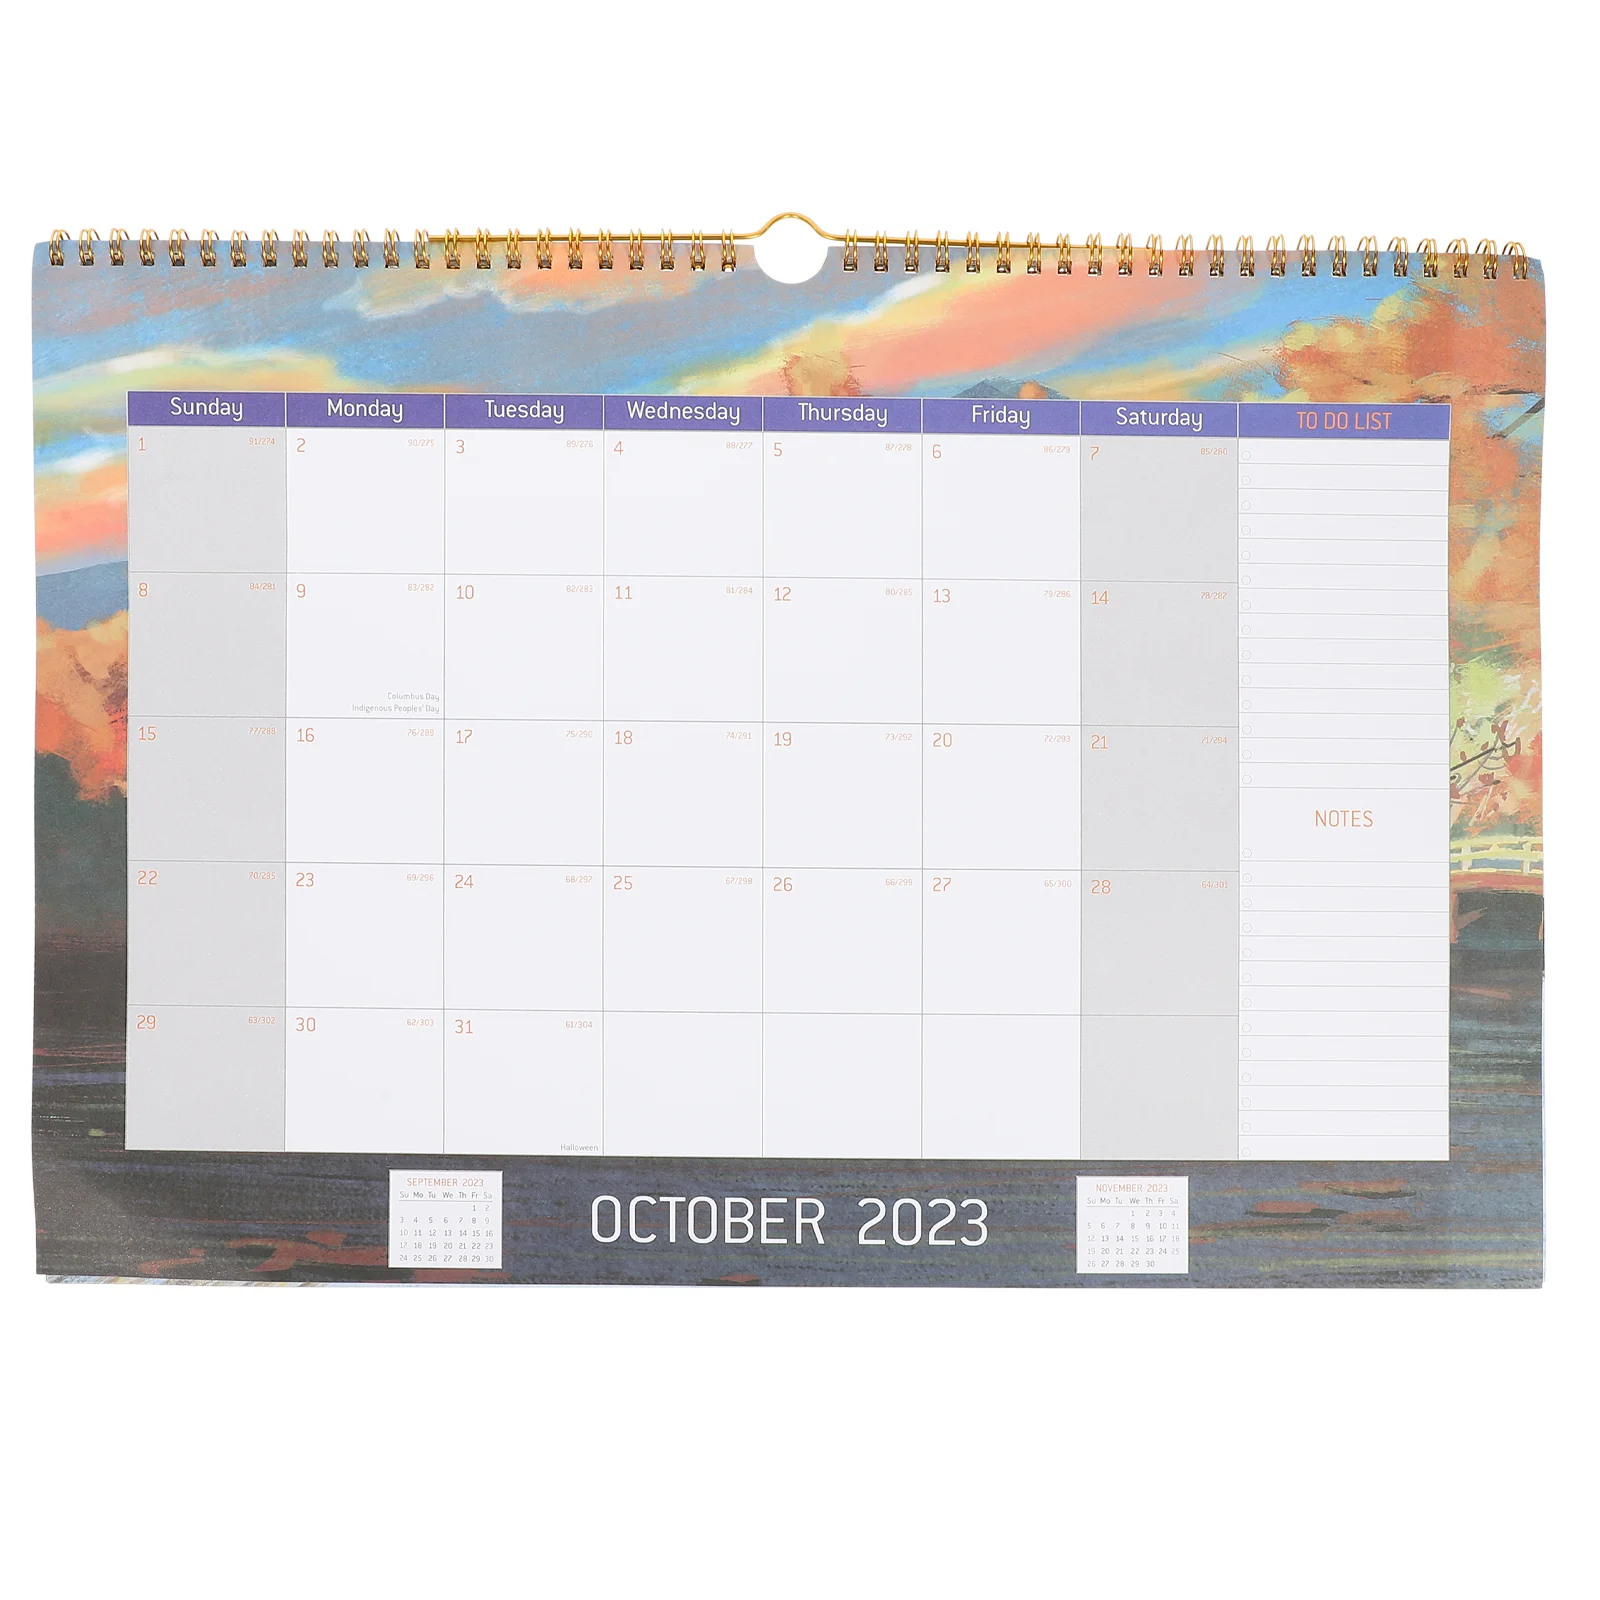 Calendar Wall Desk Monthly Planner 2024 Hanging Office Daily English Memo Schedule 2023 Large Calender Easel Countdown Planning